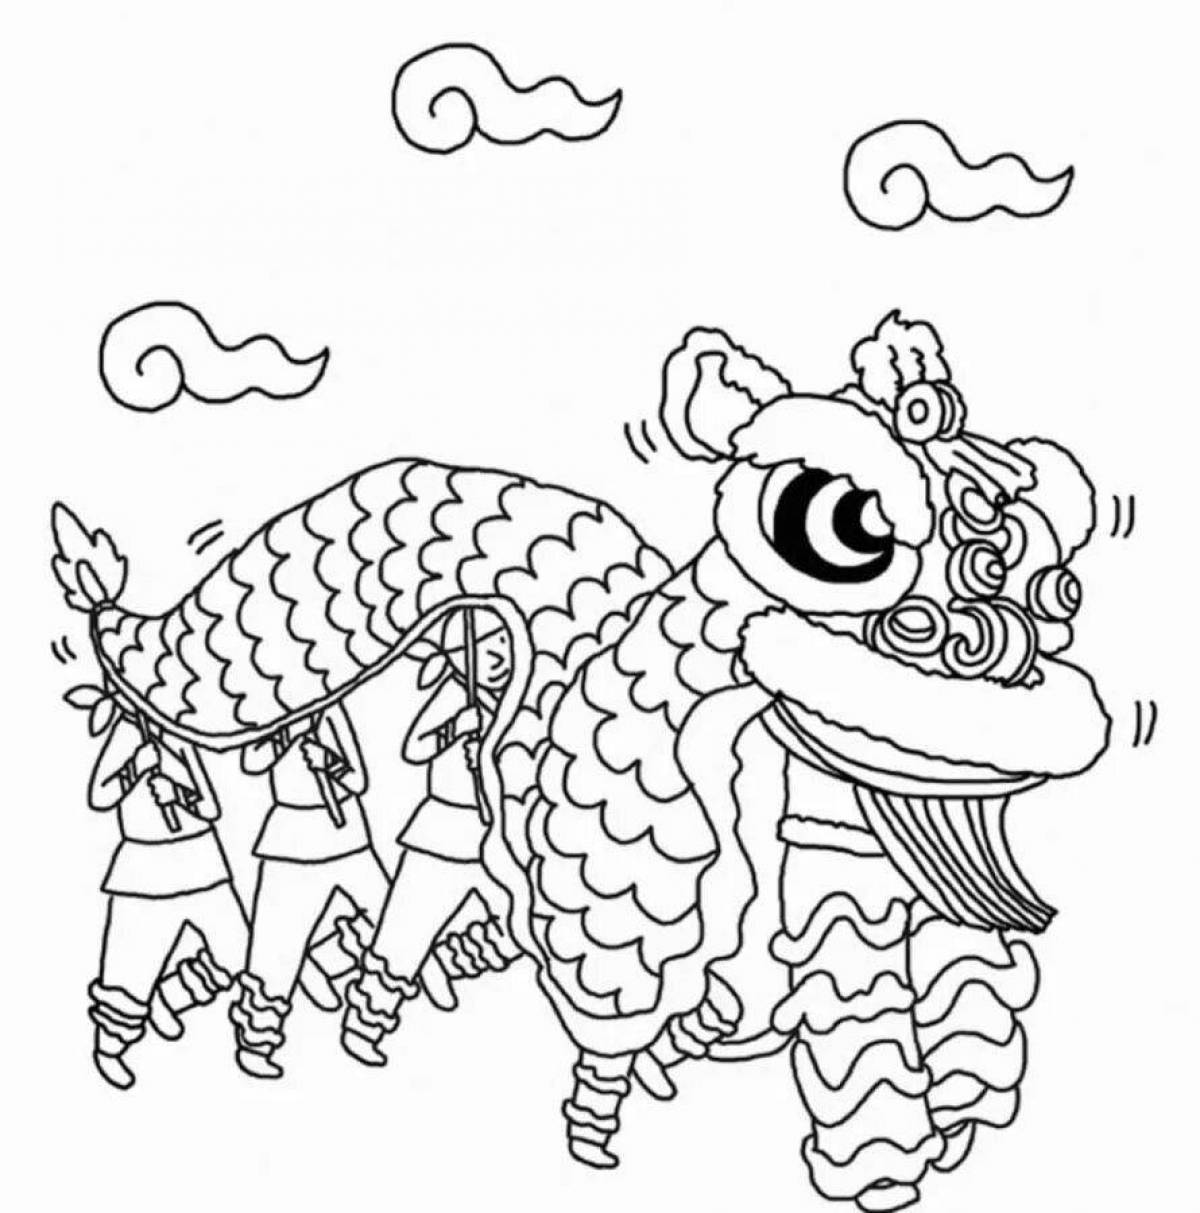 Festive Chinese New Year Coloring Page